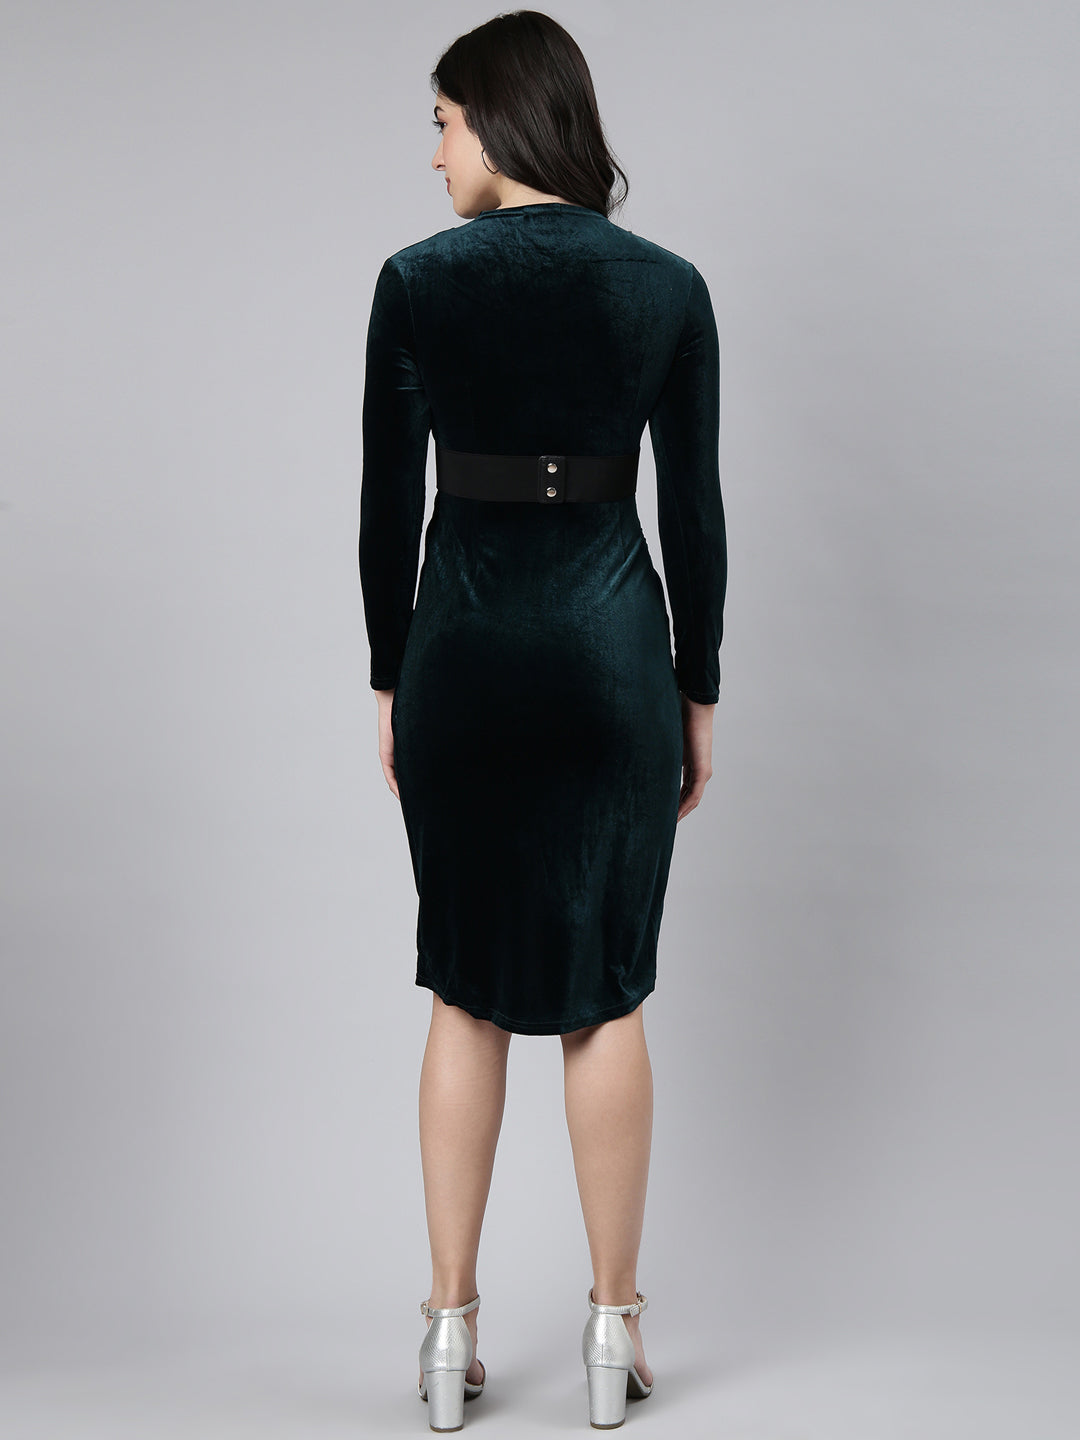 Women Solid Green Sheath Dress comes with Belt